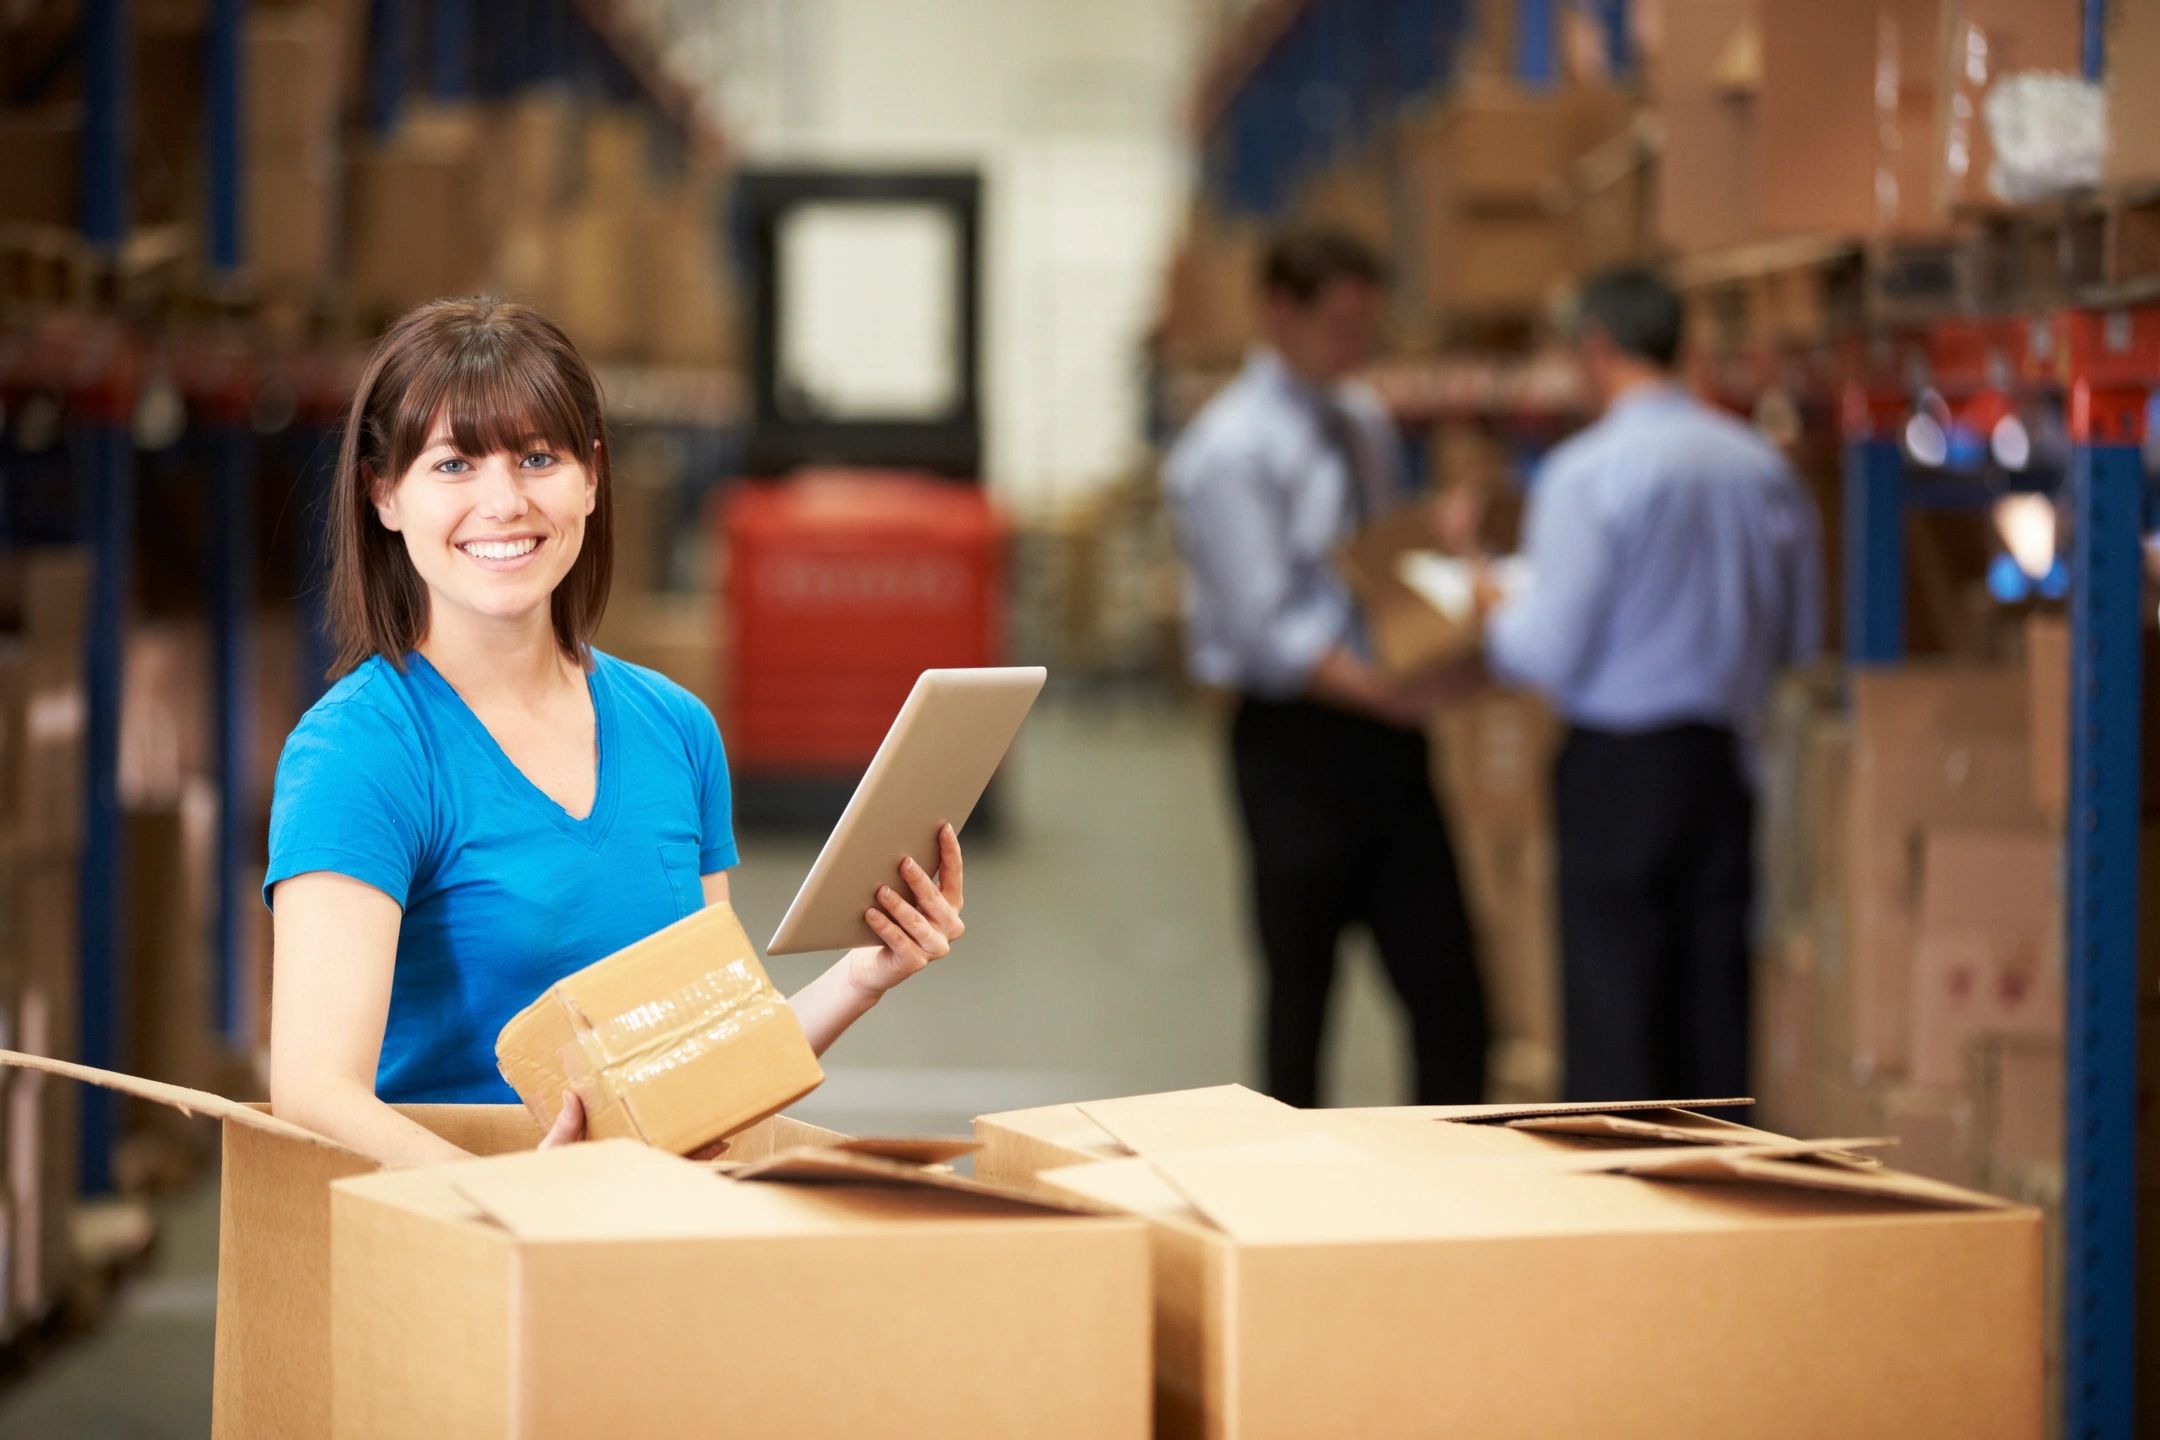 Warehouse worker manages inventory with a digital tablet in a busy distribution center.